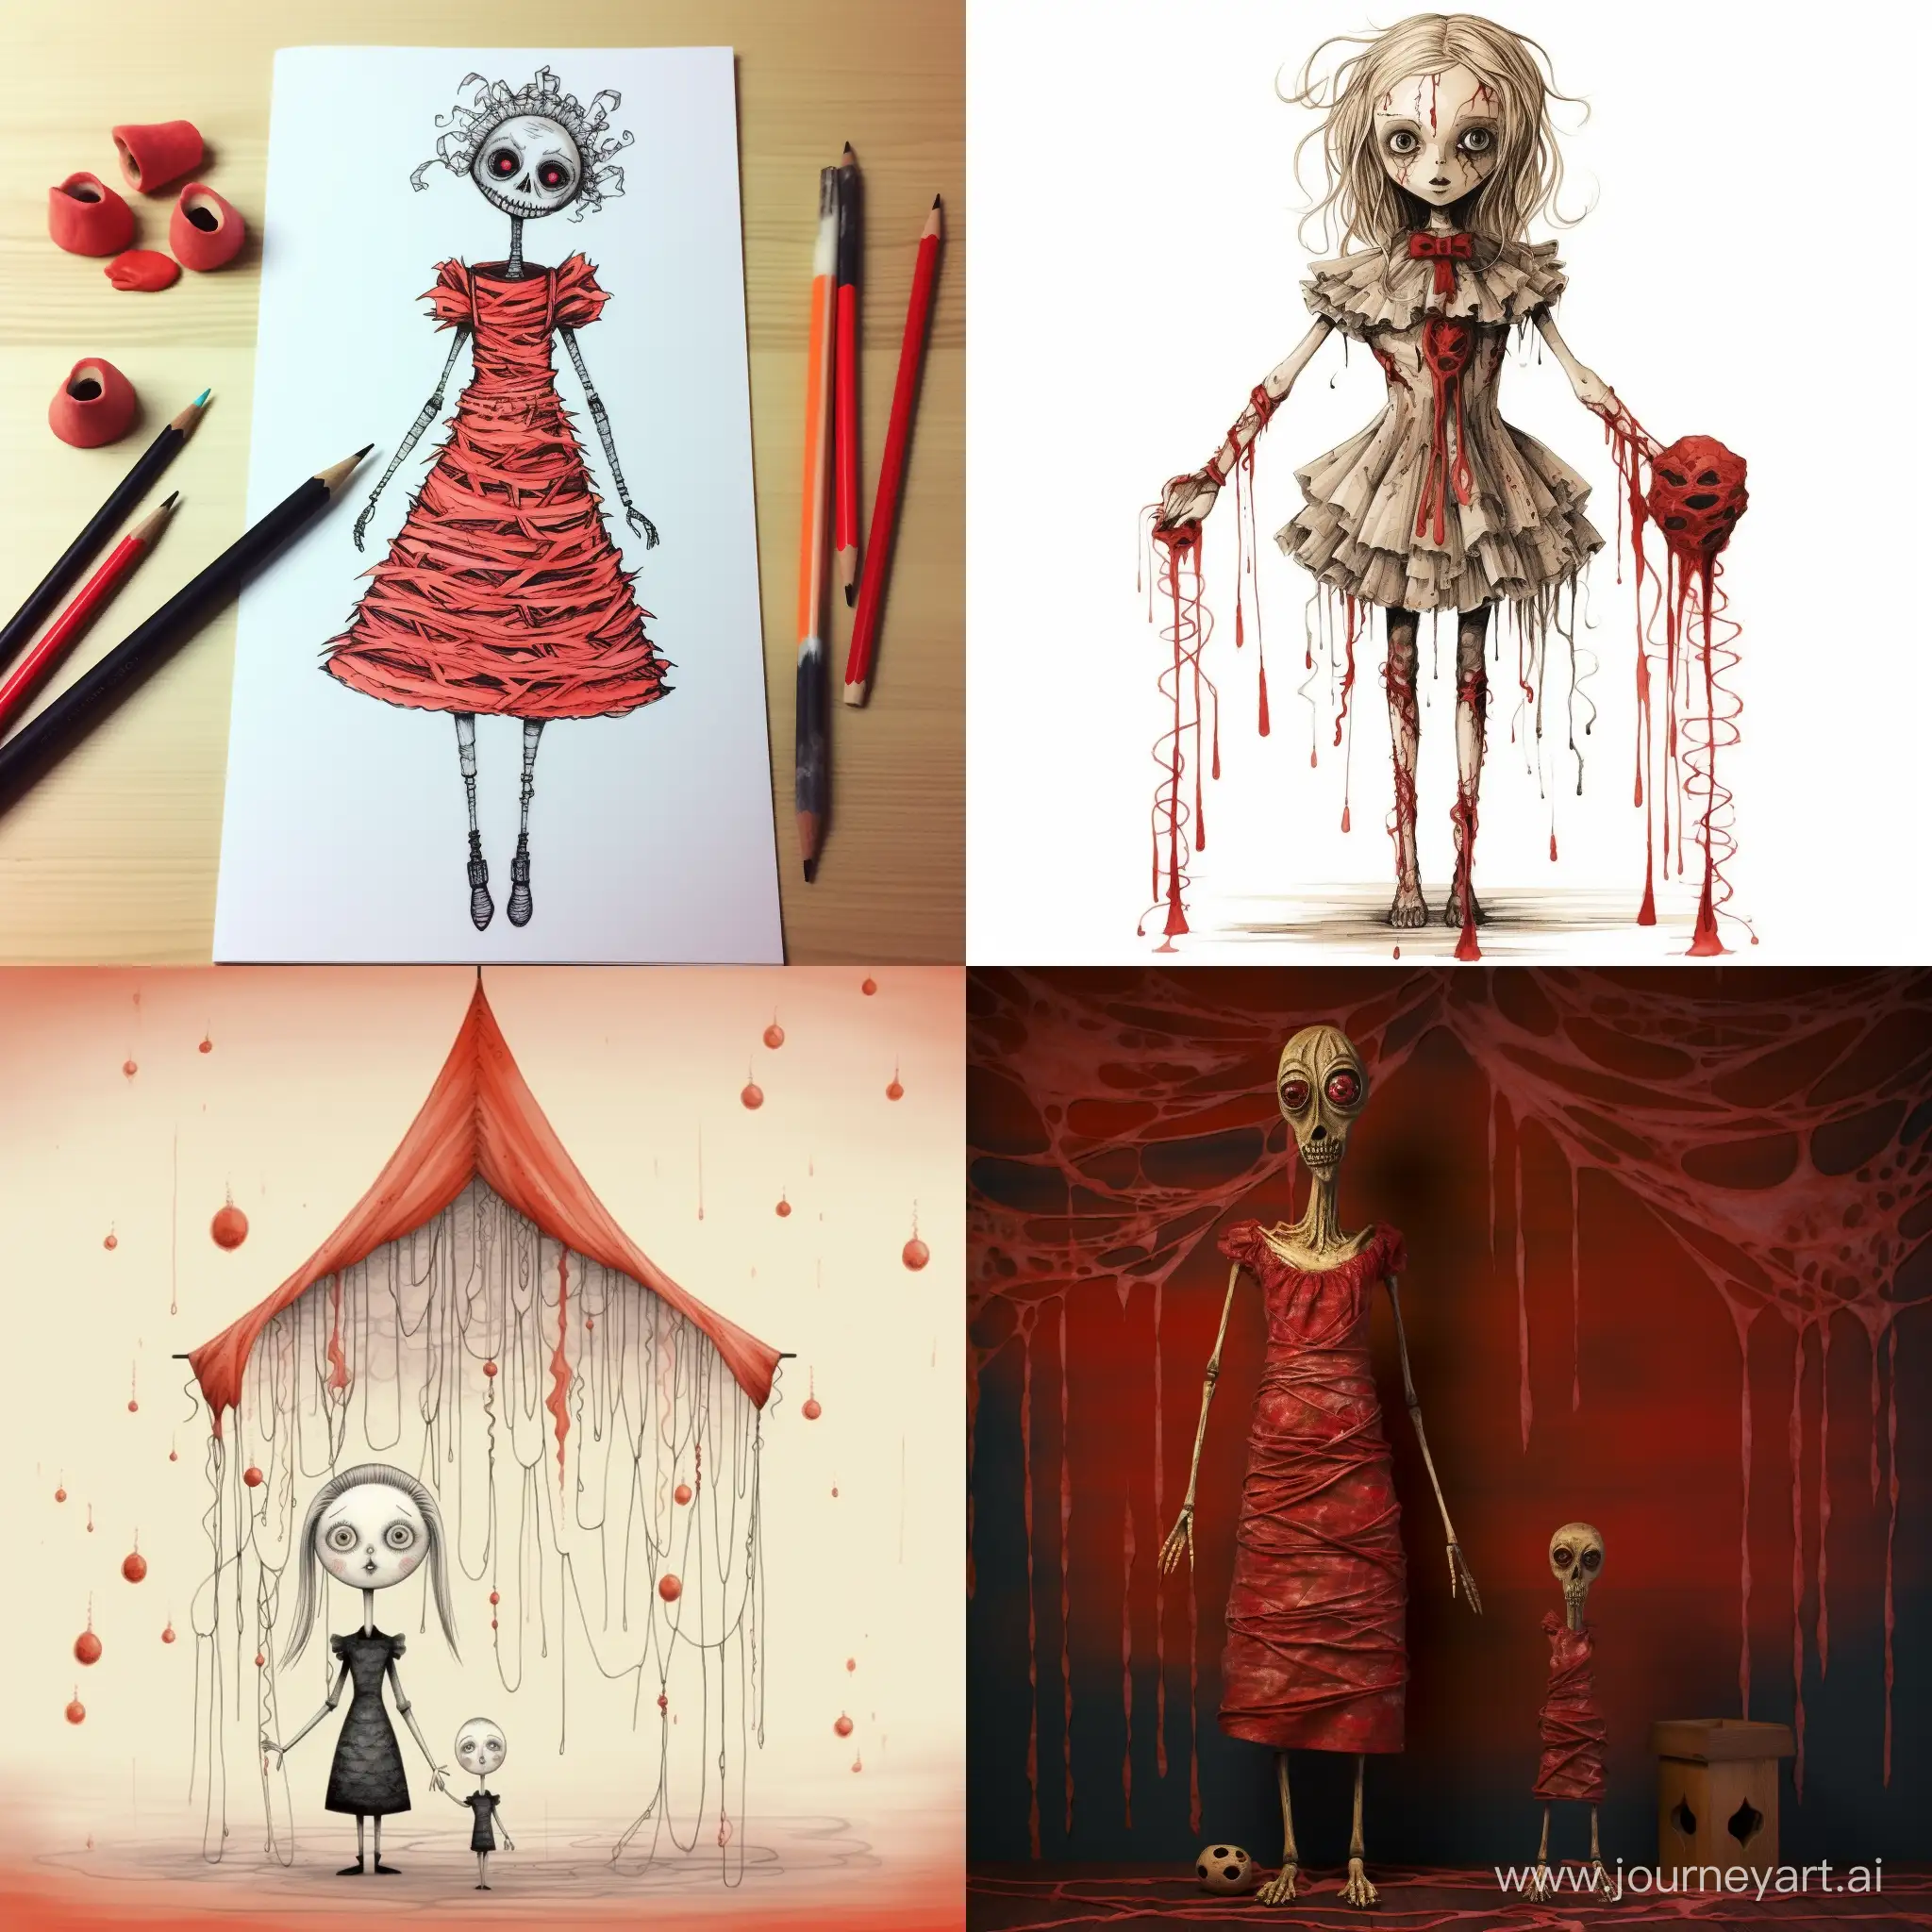 Draw Mammy long legs from poppy playtime, make it very very creepy with blood and things